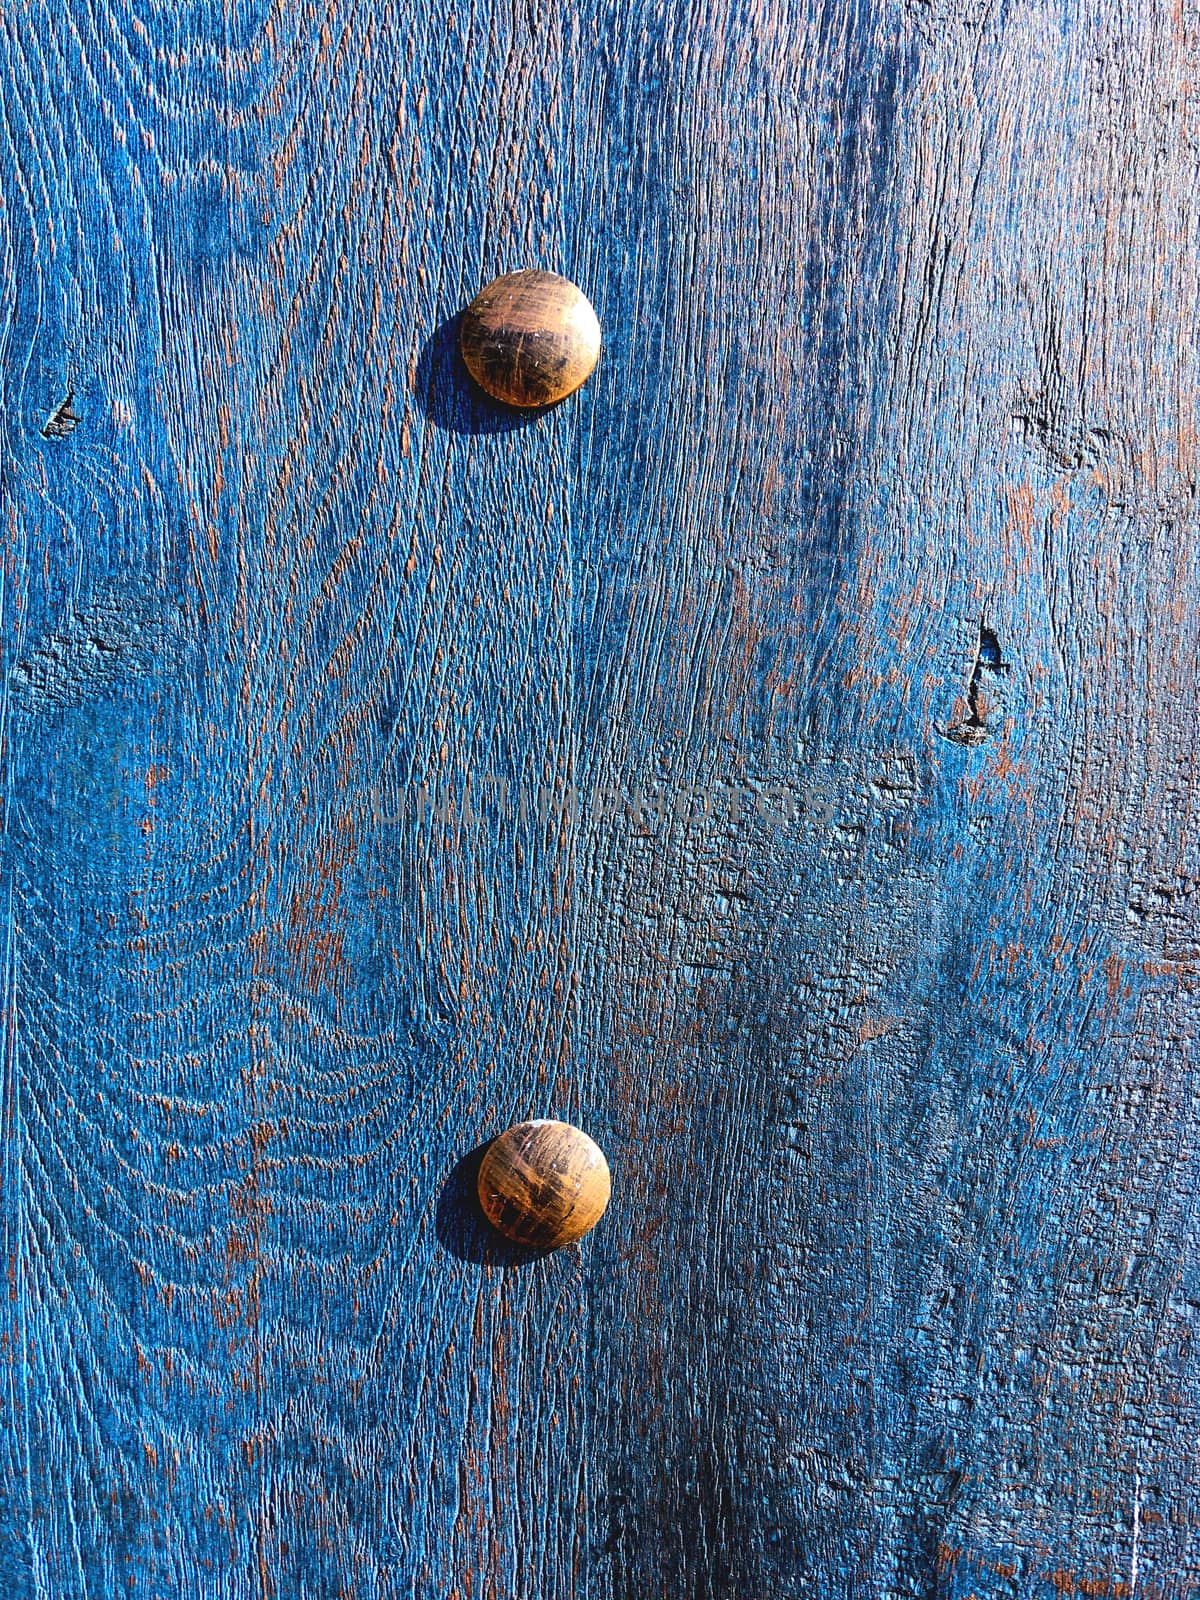 Classic blue wooden background of old door with metal details. by aksenovko